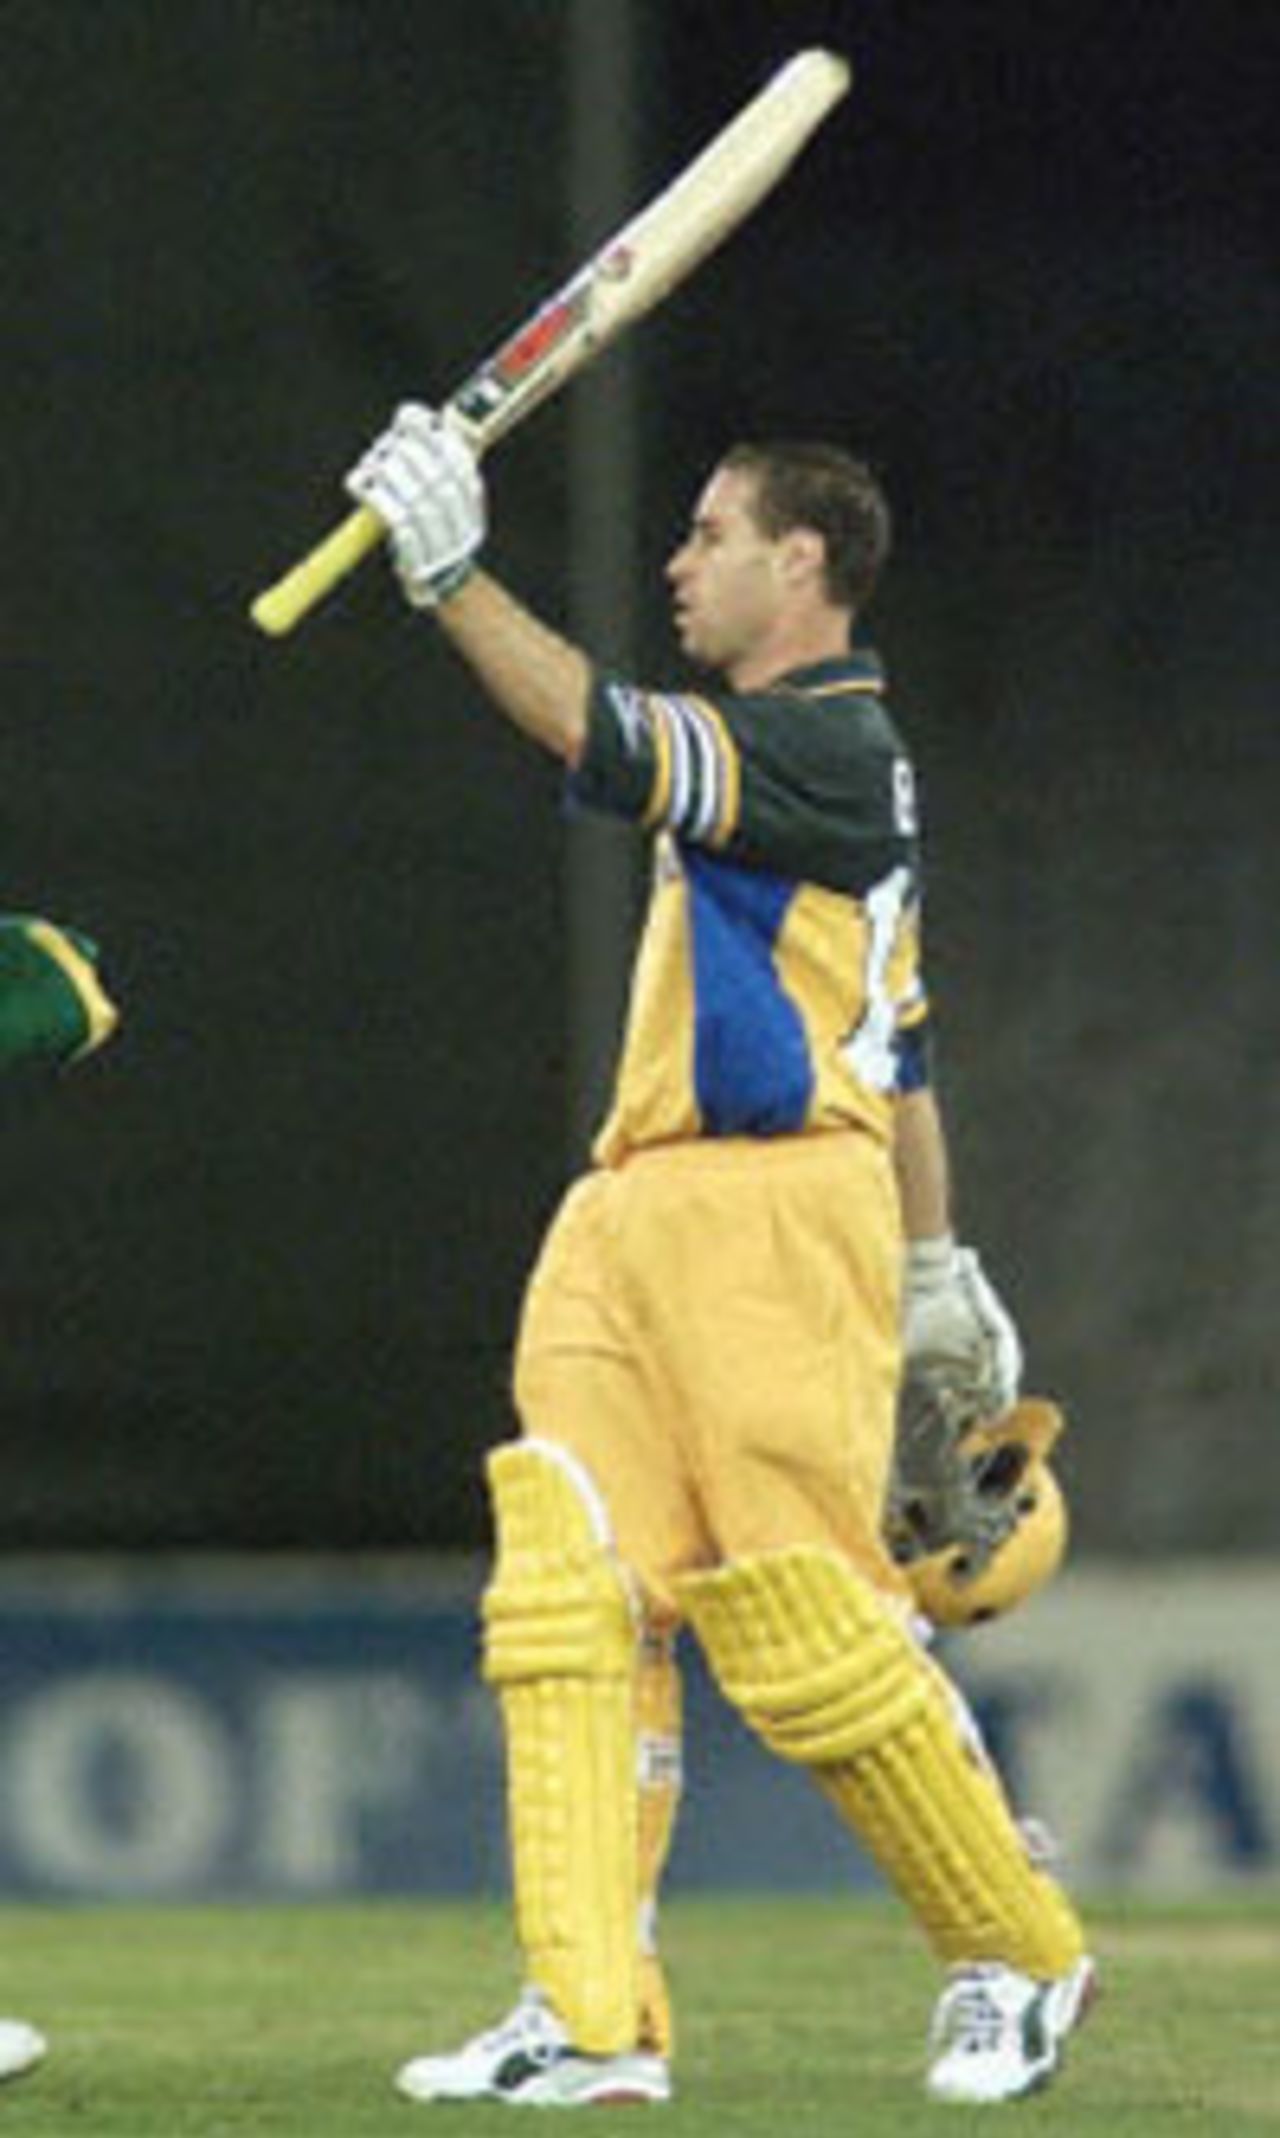 Australian batsman Michael Bevan acknowledges the crowds applause after scoring a century in the first one day cricket match in history to be played under a closed roof at the Colonial Stadium, as Australia takes on South Africa in Melbourne. Being played in the middle of winter in Melbourne, Australia scored 295-5 in their 50 overs with captain Steve Waugh scoring 114 not out and Bevan 106. South Africa in Australia, 2000/01, 1st One-Day International, Australia v South Africa, Colonial Stadium, Melbourne, 16 August 2000.